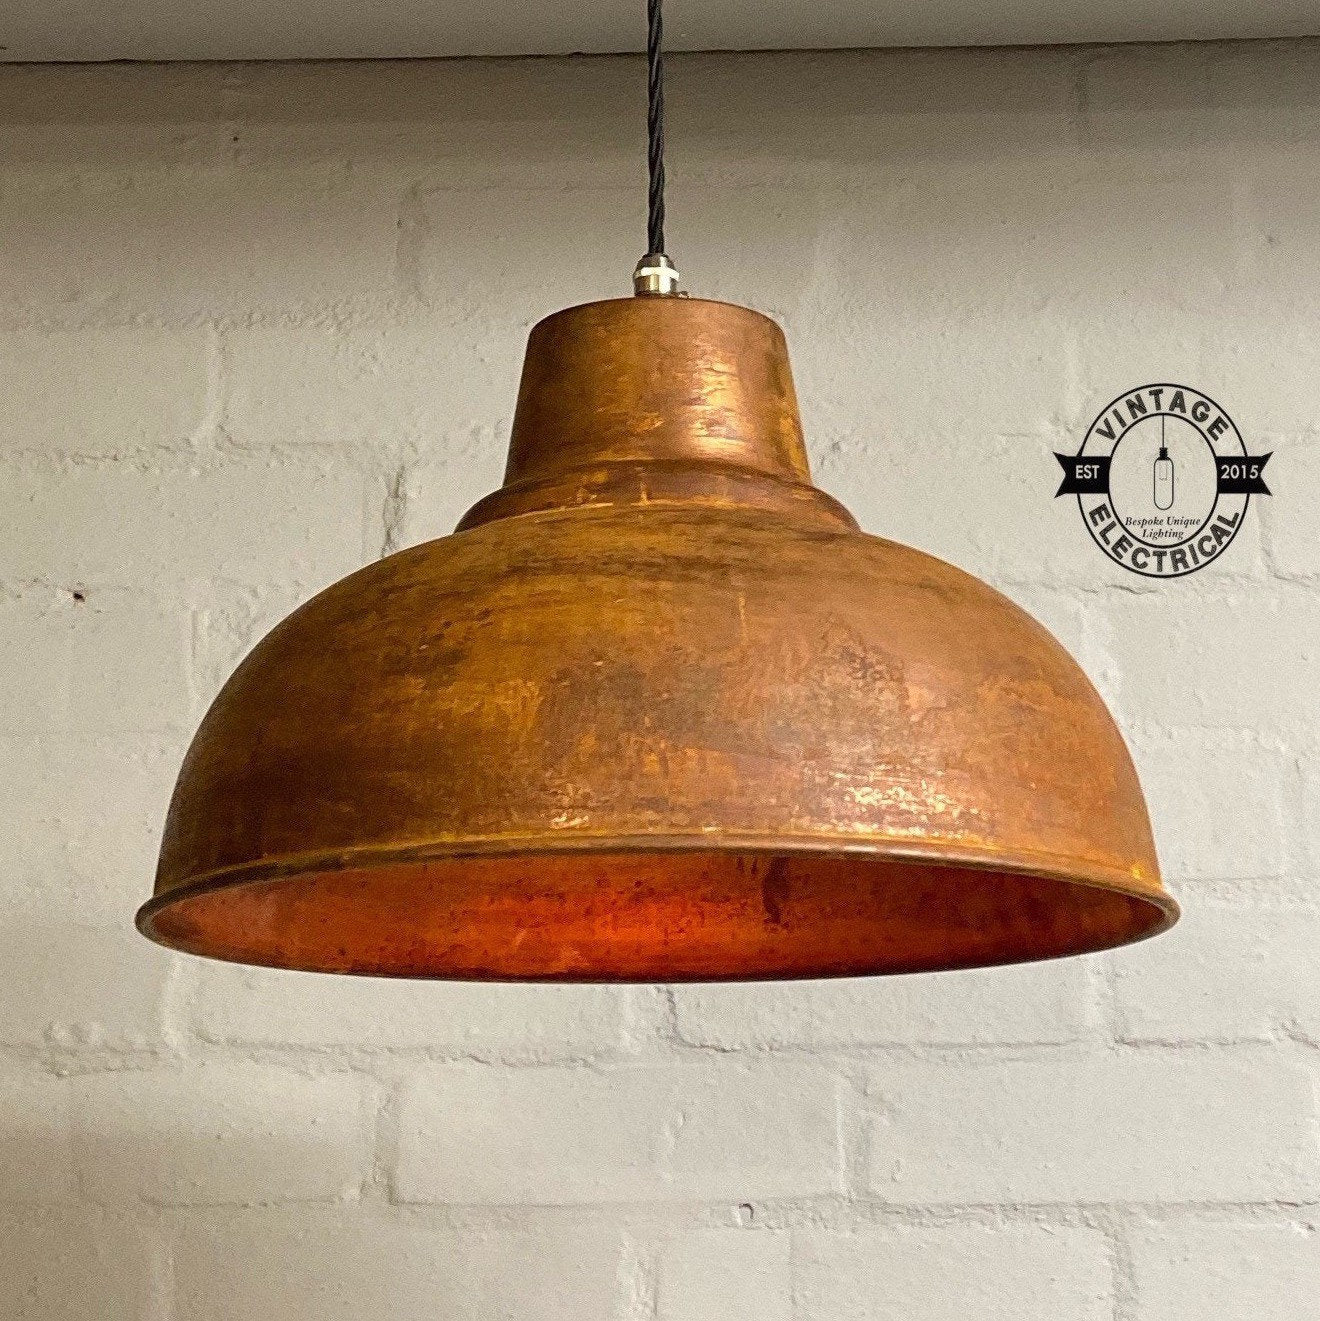 Salthouse XL ~ Rusted Solid Industrial Shade Pendant Set Light | Ceiling Dining Room | Kitchen Table | Vintage Filament Bulb 14.5 Inch